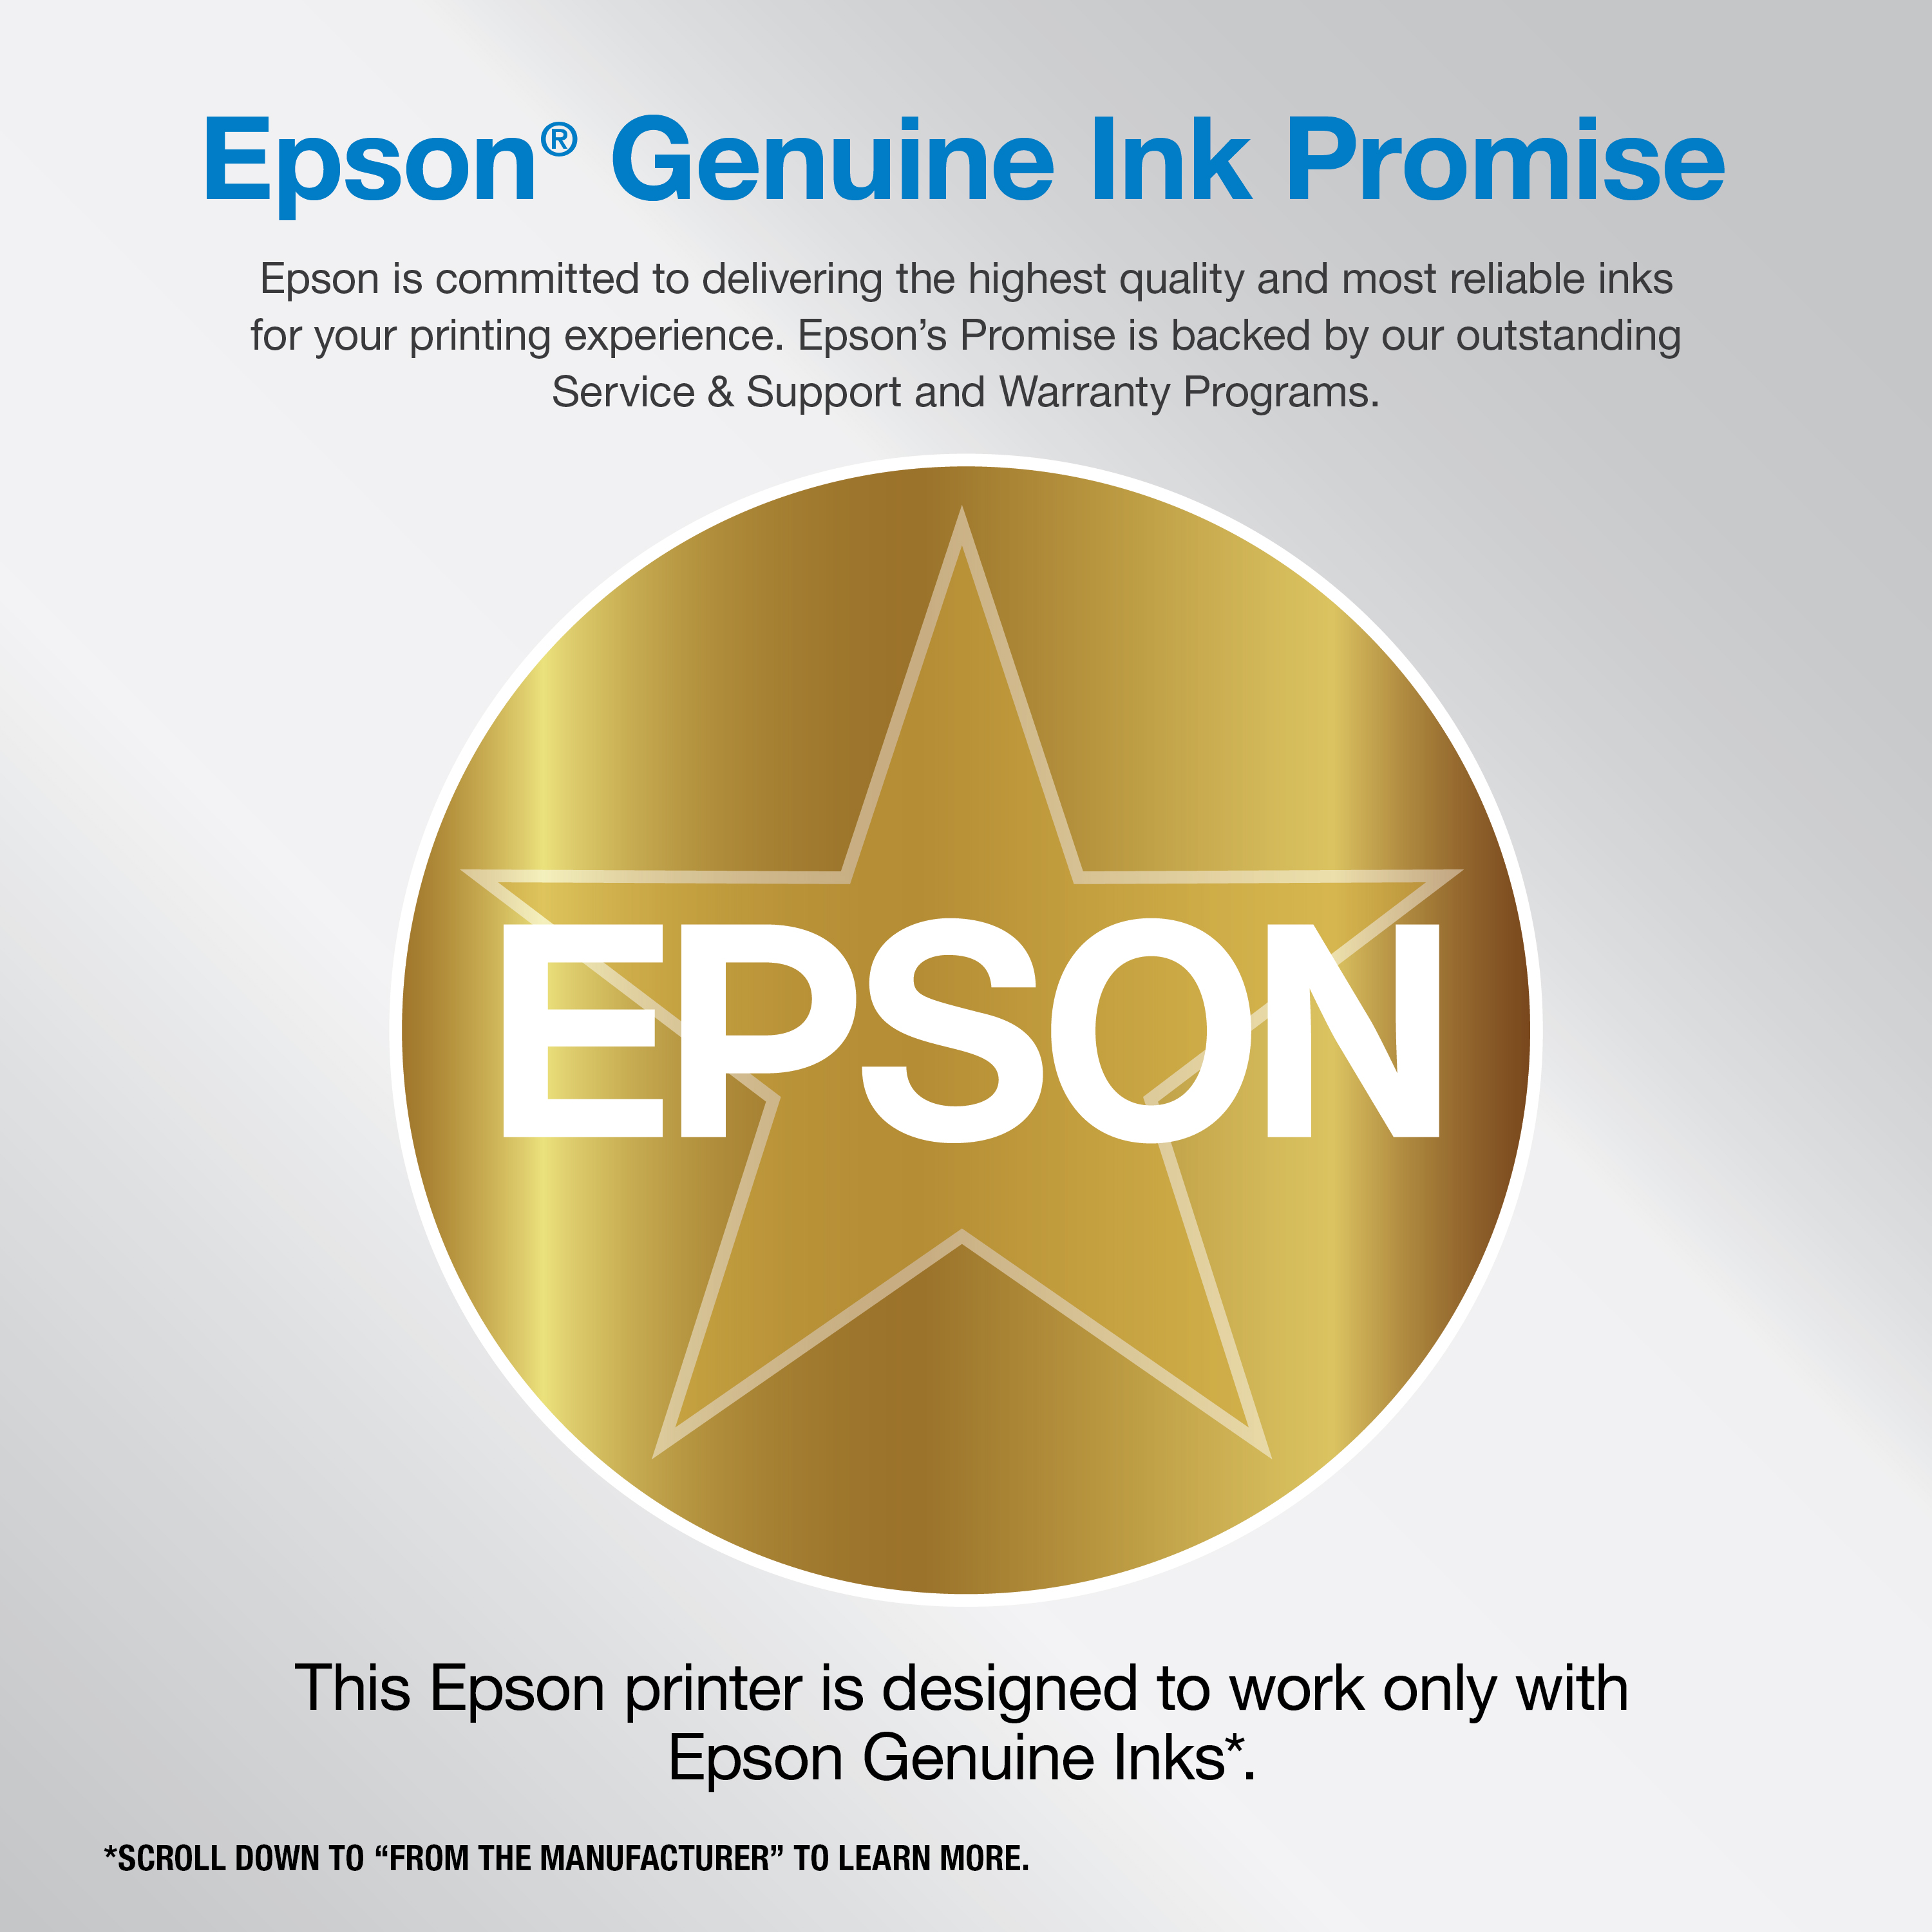 Epson WorkForce Pro WF-4820 Wireless All-in-One Printer with Auto 2-sided Printing, 35-page ADF, 250-sheet Paper Tray and 4.3" Color Touchscreen - image 2 of 6